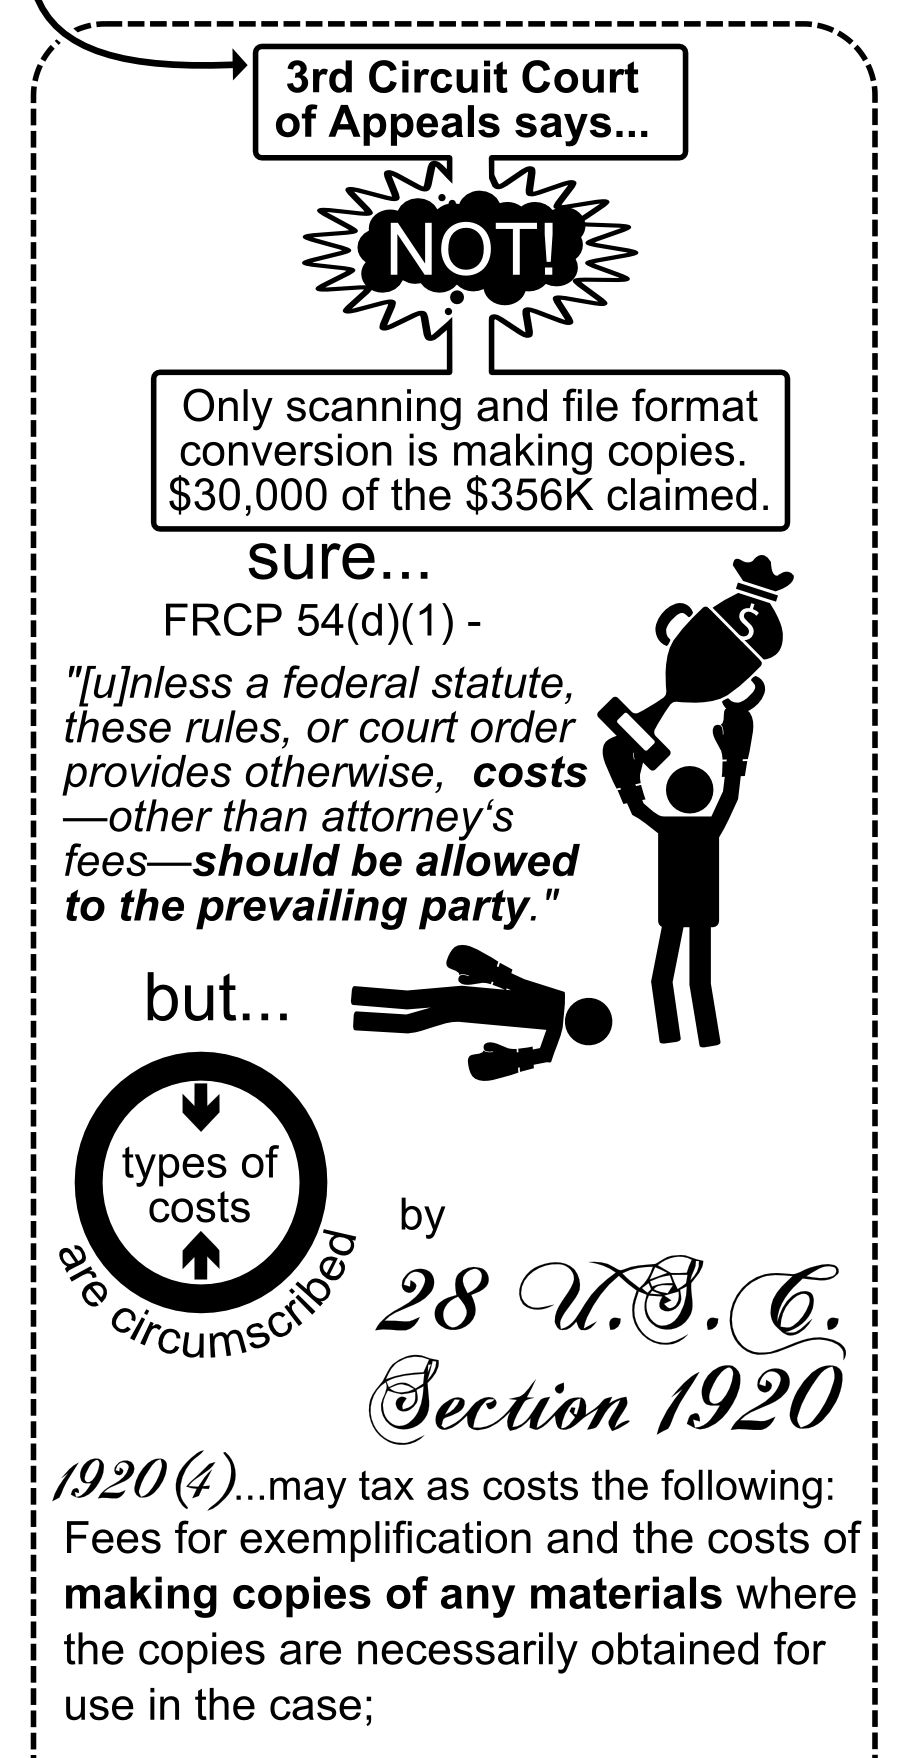 3rd Circuit Court of Appeals says... Only scanning and file format conversion is making copies. $30,000 of the $356K claimed. NOT! FRCP 54(d)(1) - 